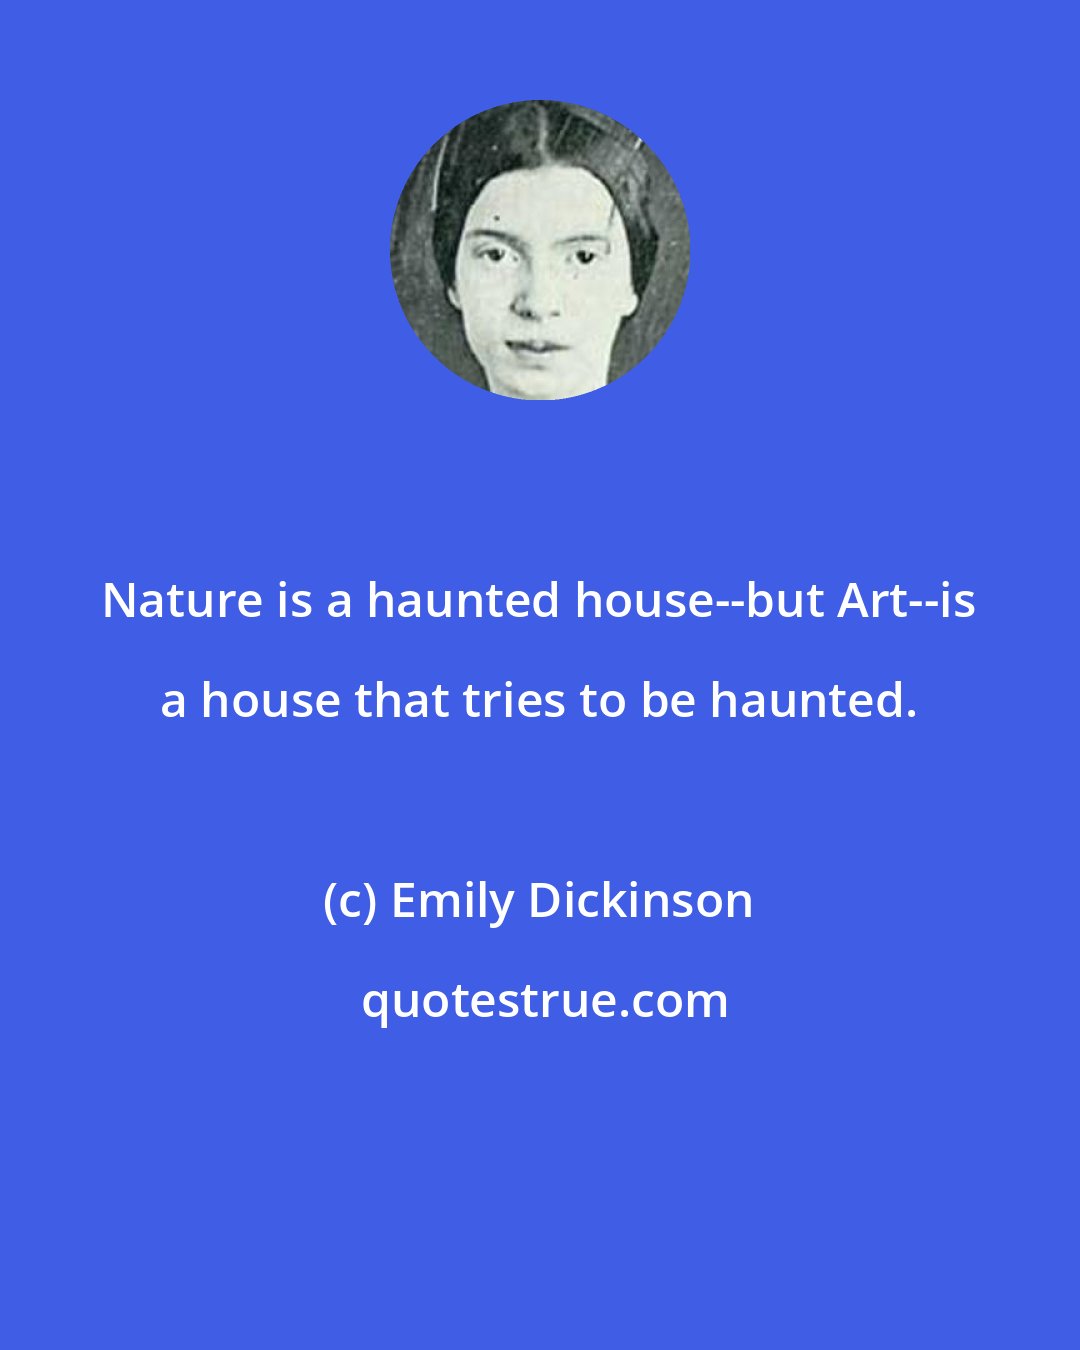 Emily Dickinson: Nature is a haunted house--but Art--is a house that tries to be haunted.